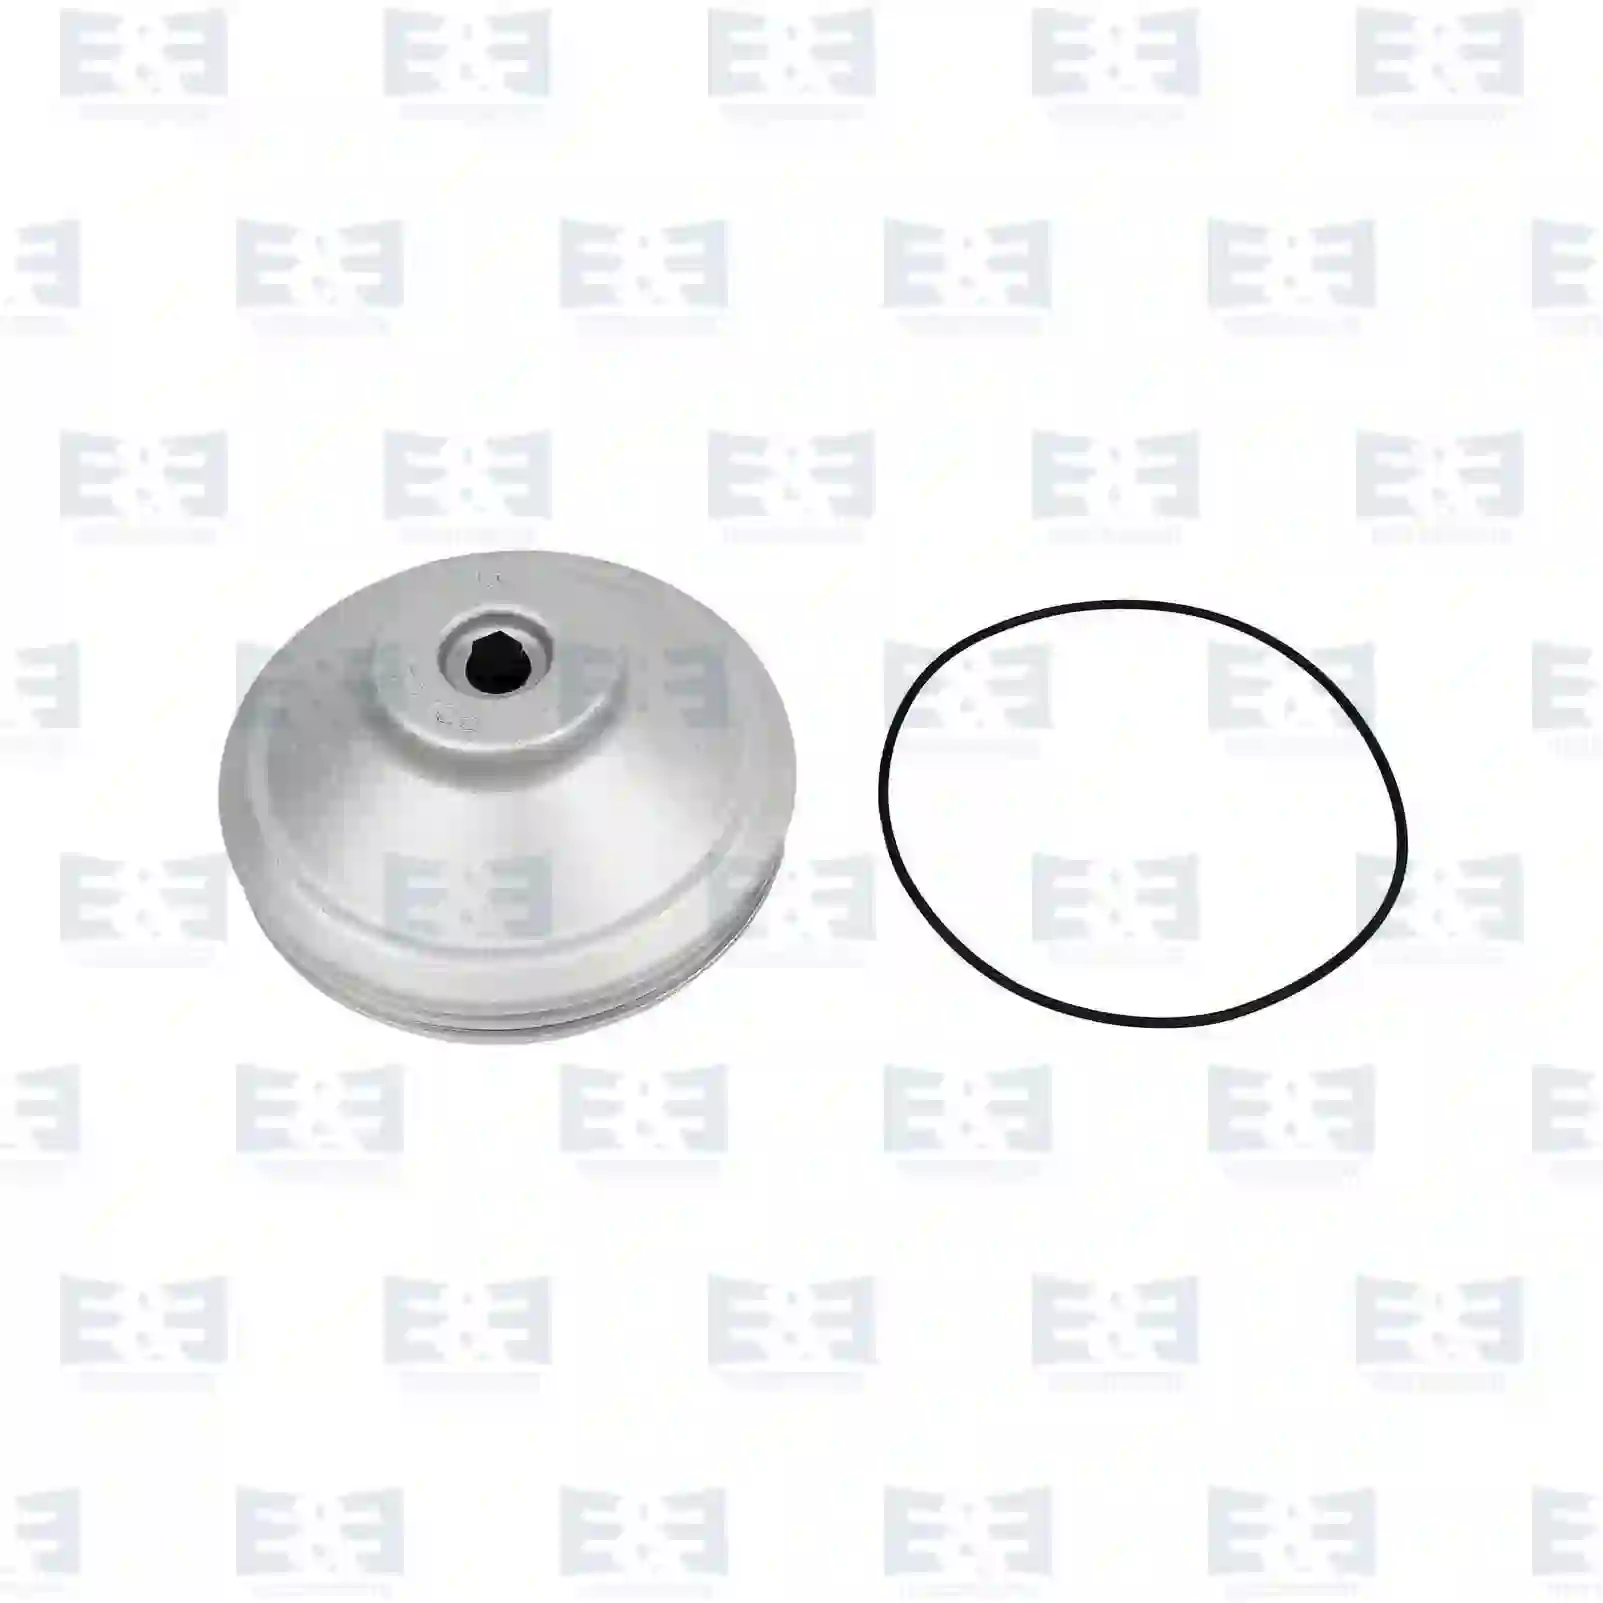  Hub cover, complete with o-ring || E&E Truck Spare Parts | Truck Spare Parts, Auotomotive Spare Parts